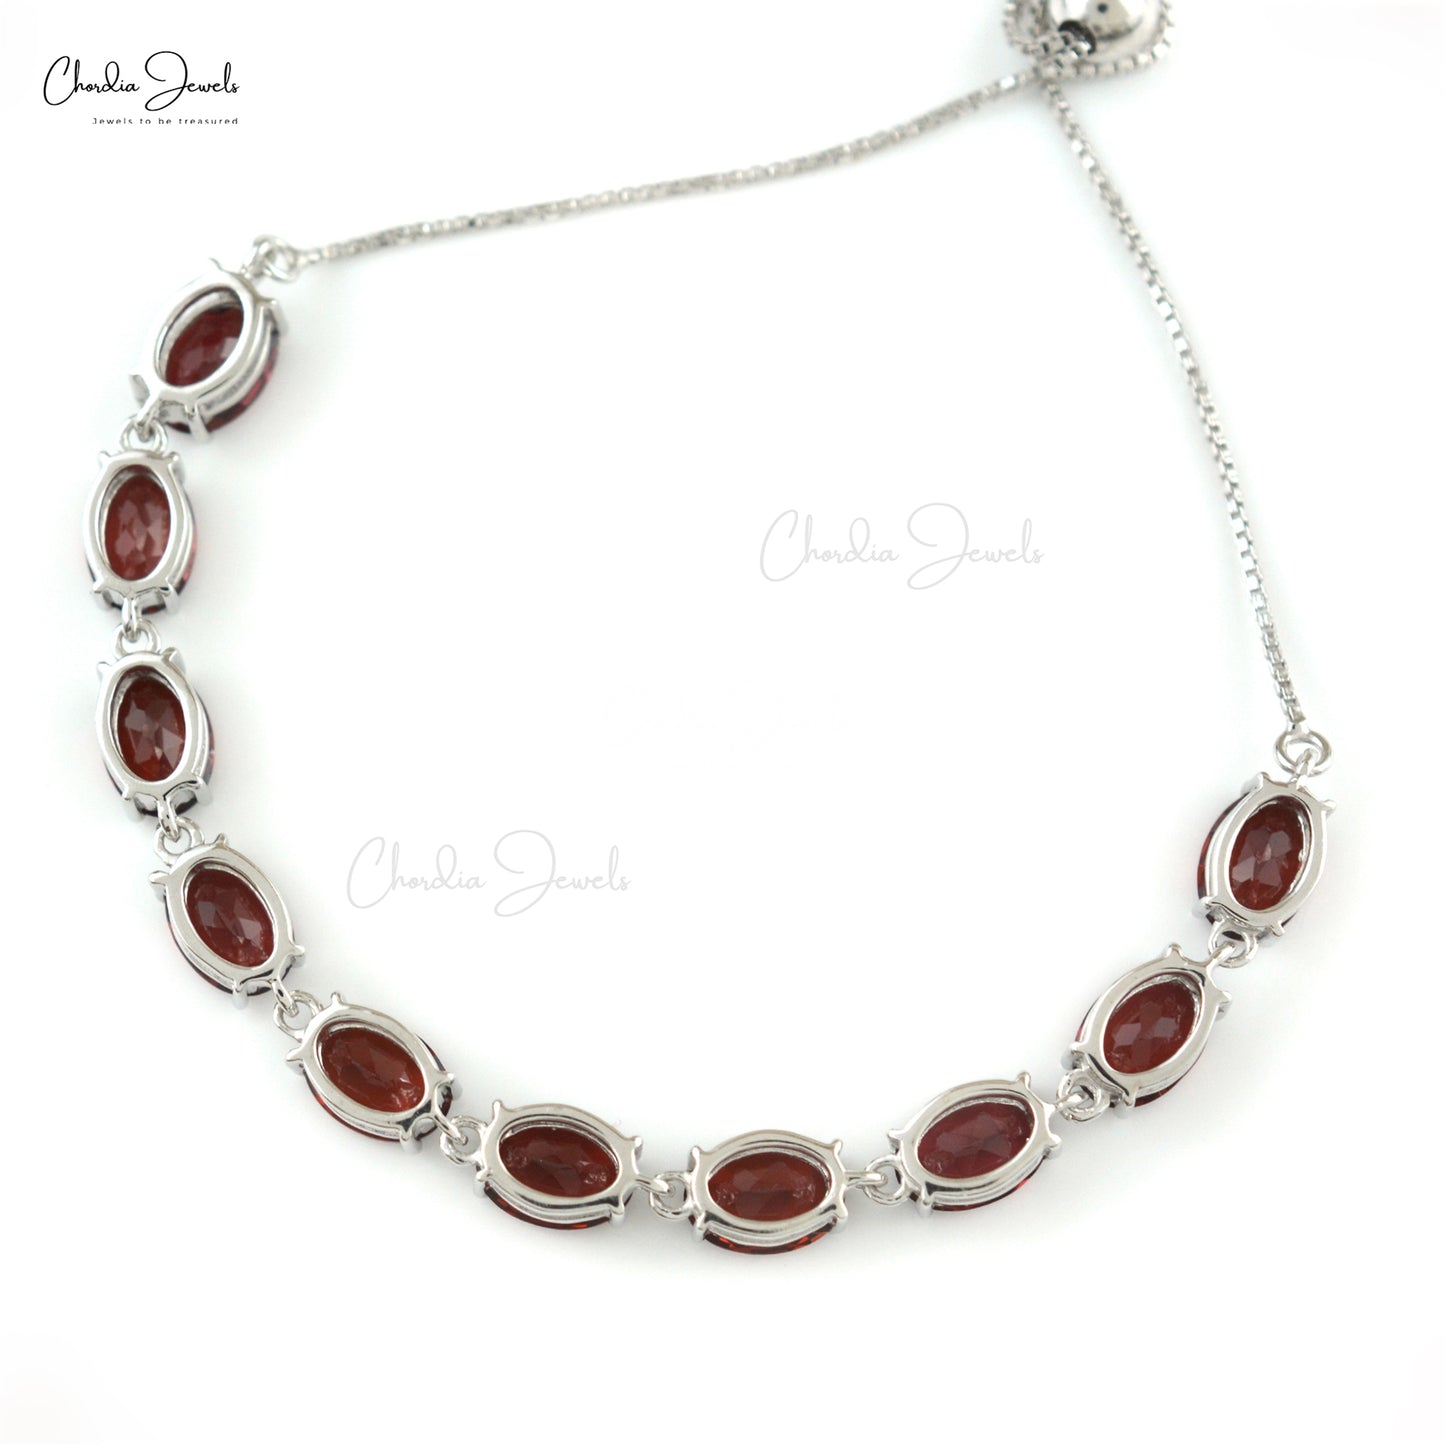 Authentic Garnet Tennis Bracelet High Quality Jewelry 925 Sterling Silver Bracelet January Birthstone Jewelry At Reasonable Price